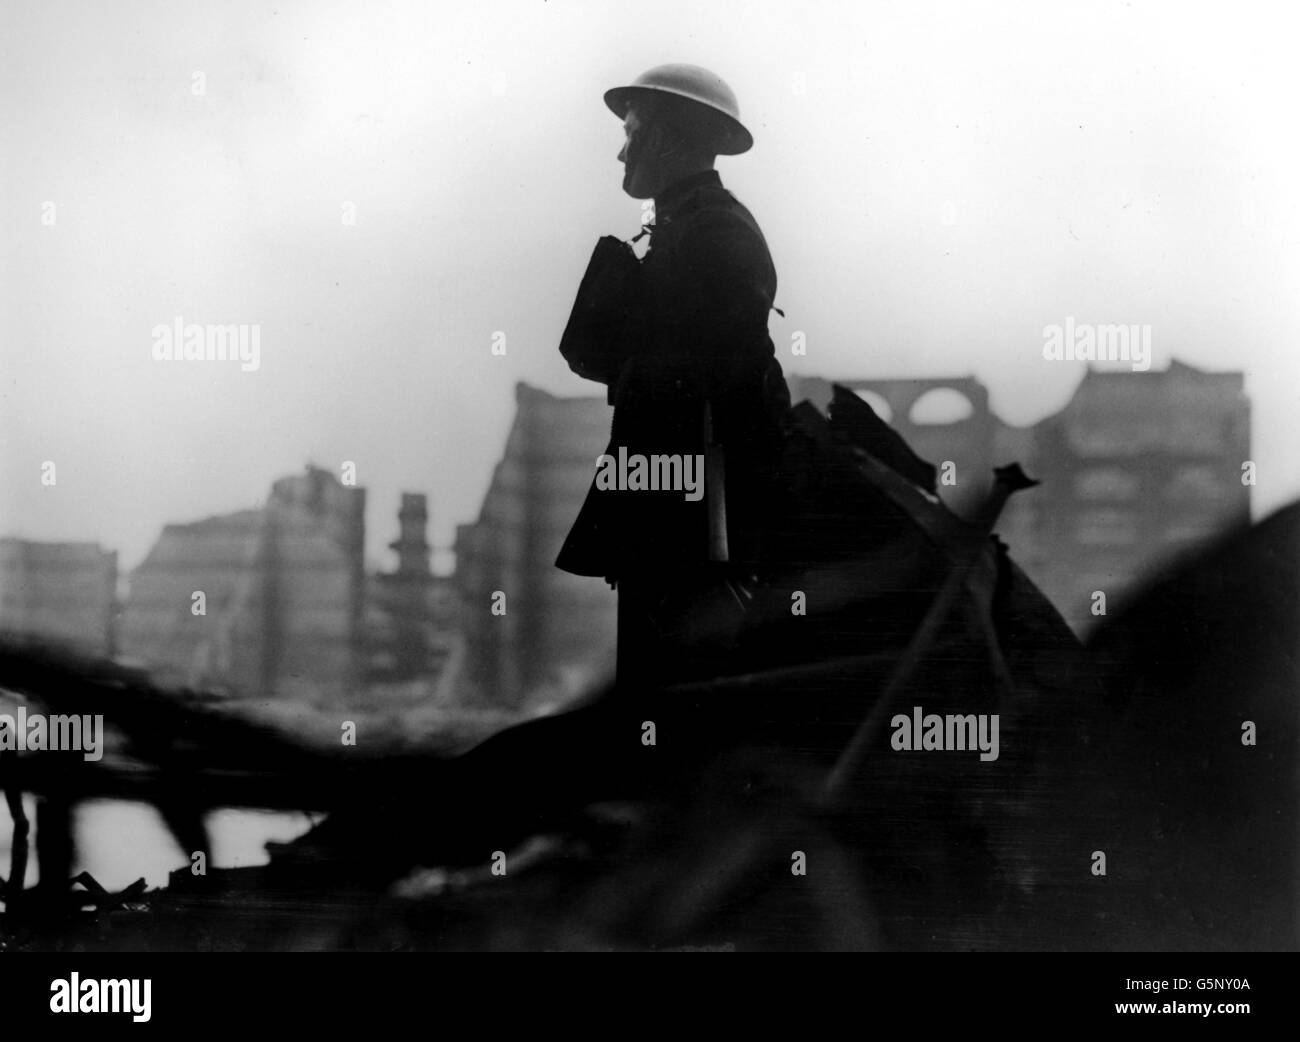 A London fireman gazes out across the devastation caused by Luftwaffe bombing in the docklands area of East London. Ruined warehousing can be seen in the background. Stock Photo